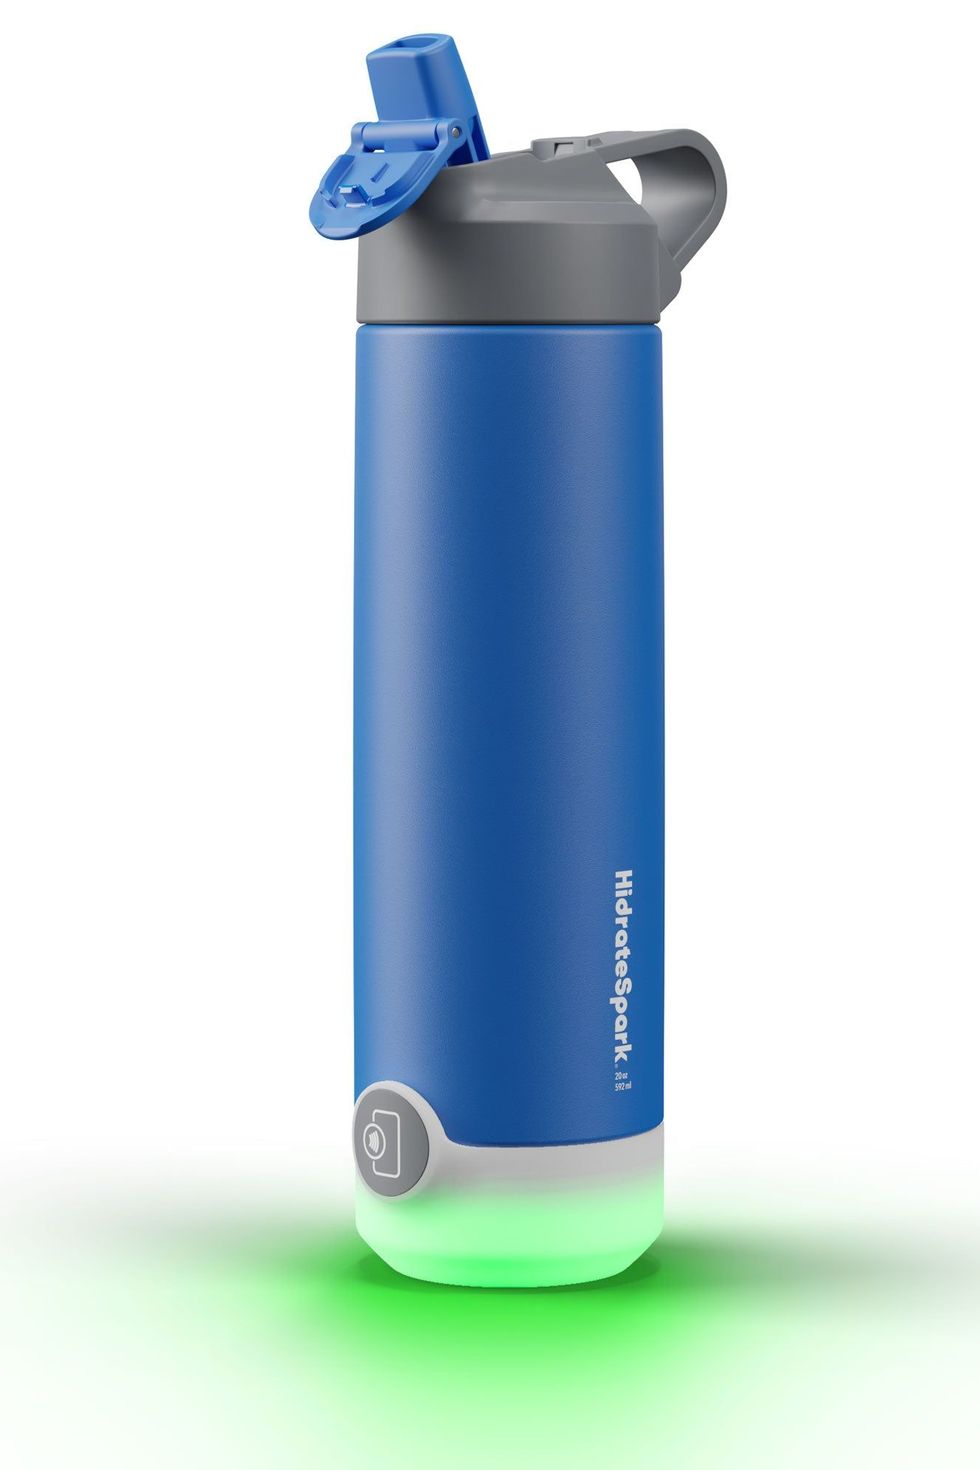 Travelers Love This Smart Water Bottle